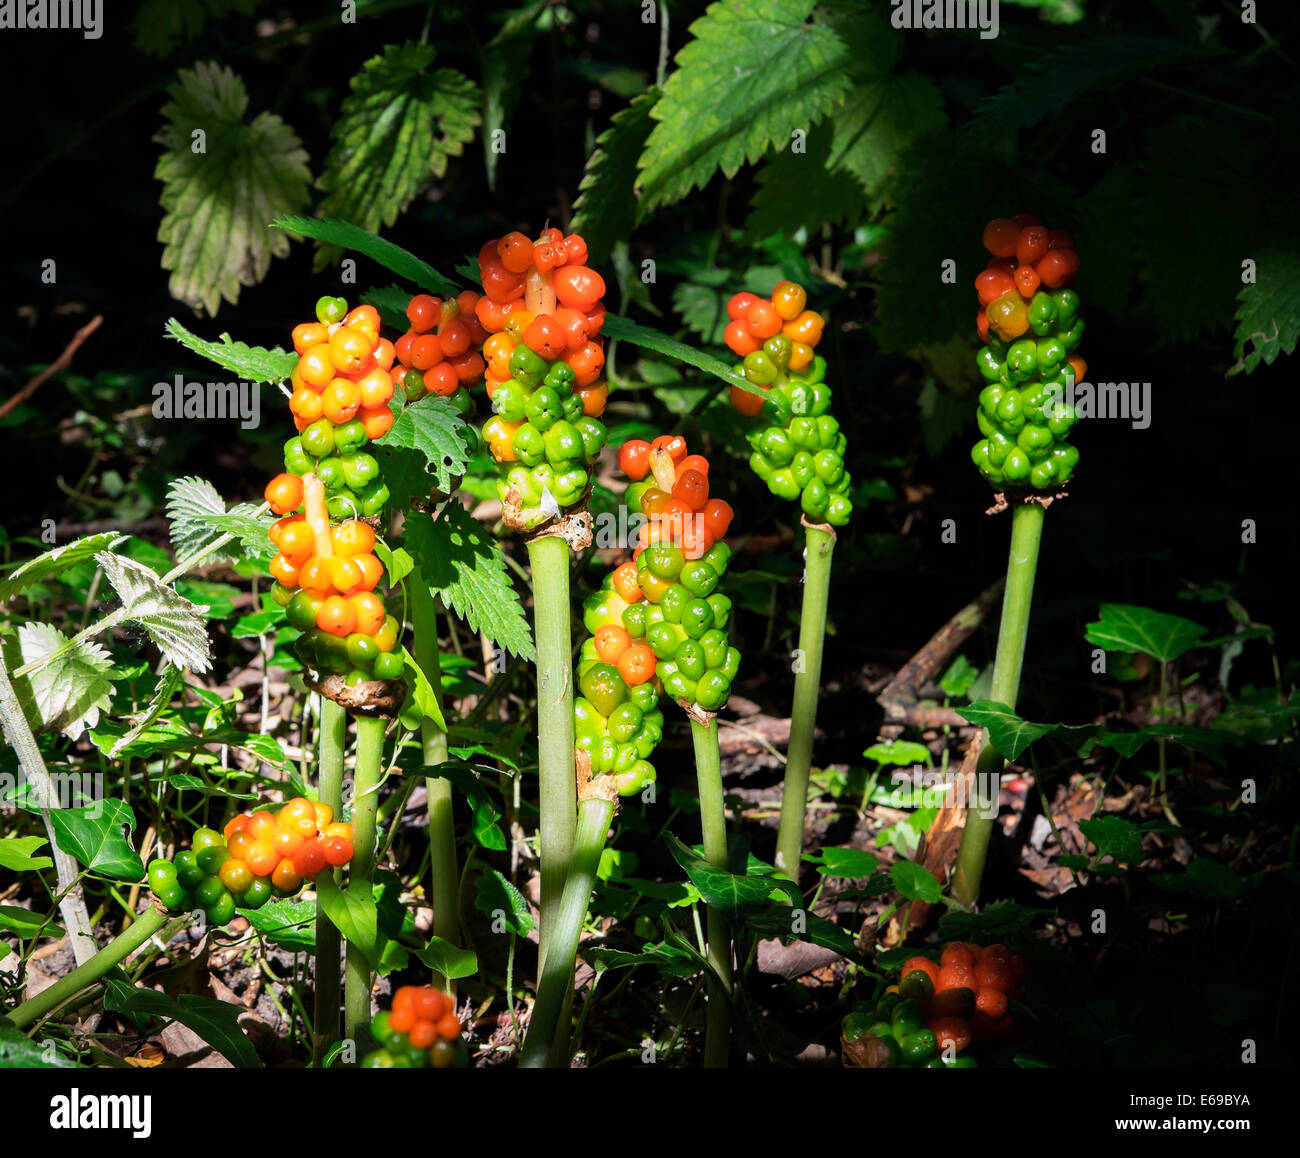 Ripening fruit on Lords and Ladies wild plants in woods Stock Photo